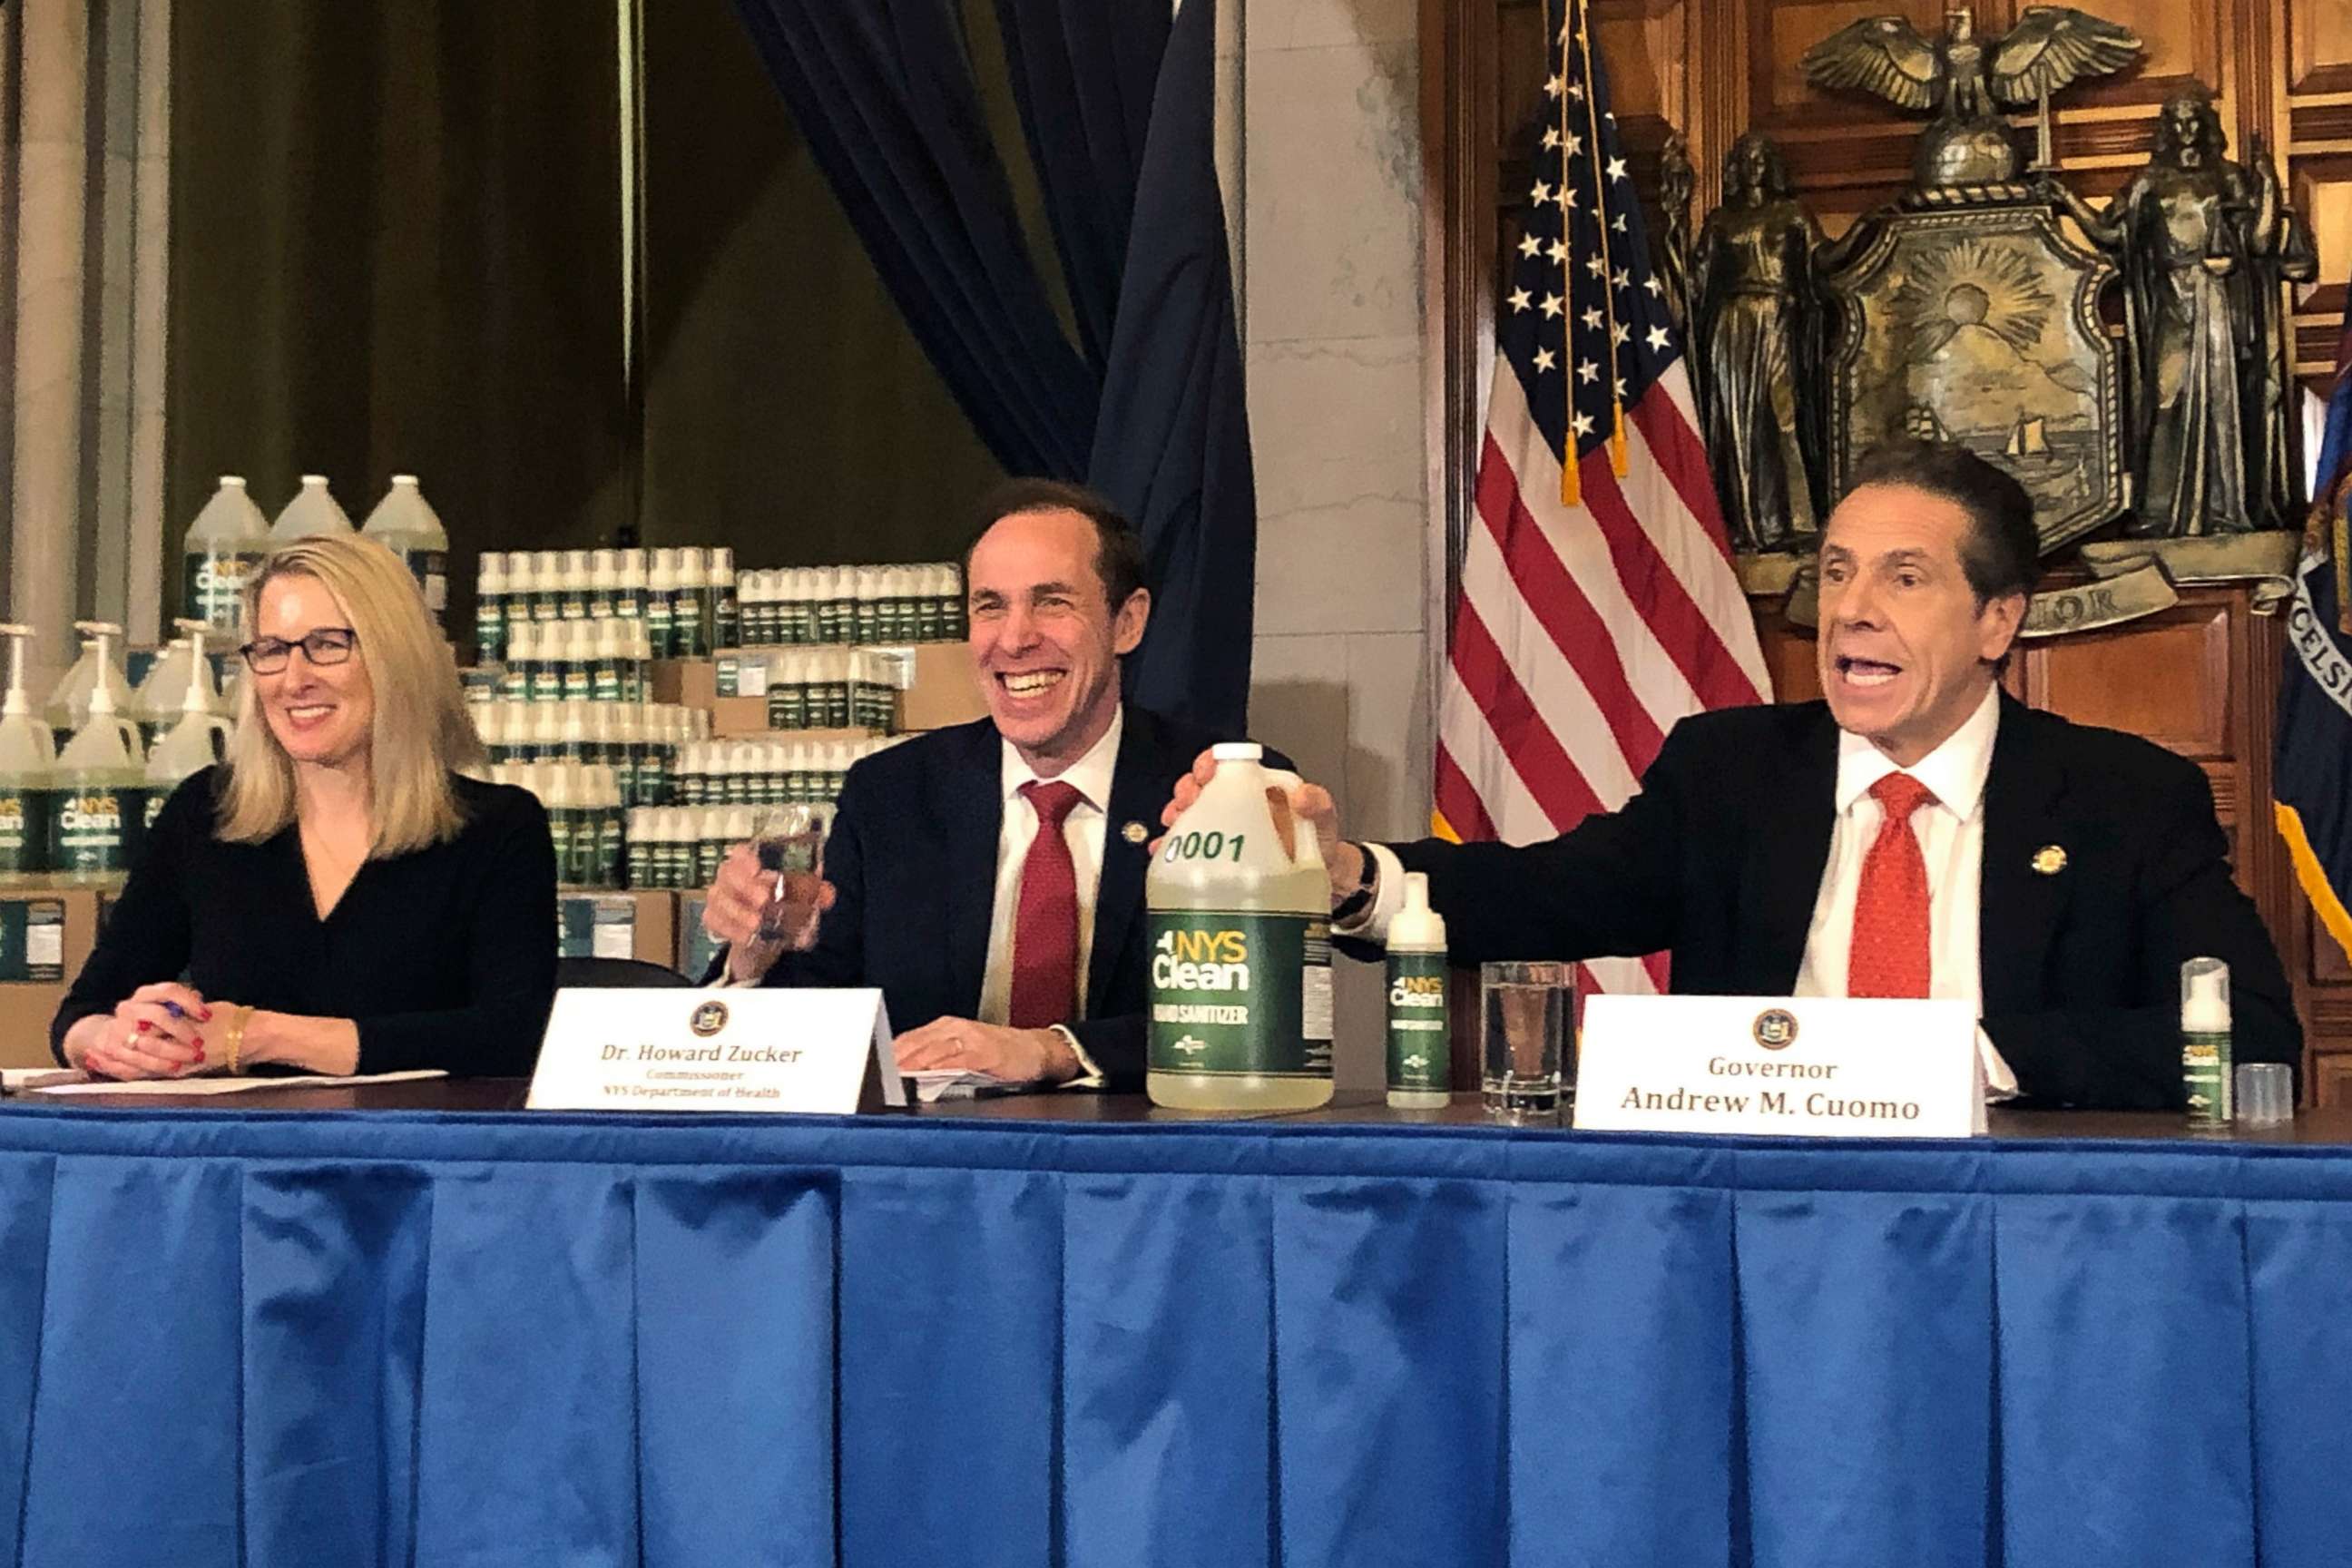 PHOTO: New York Gov. Andrew Cuomo, right, introduces "New York State Clean," a hand sanitizer manufactured by the state of New York, during a news conference update on the coronavirus, March 9, 2020, in Albany, N.Y.